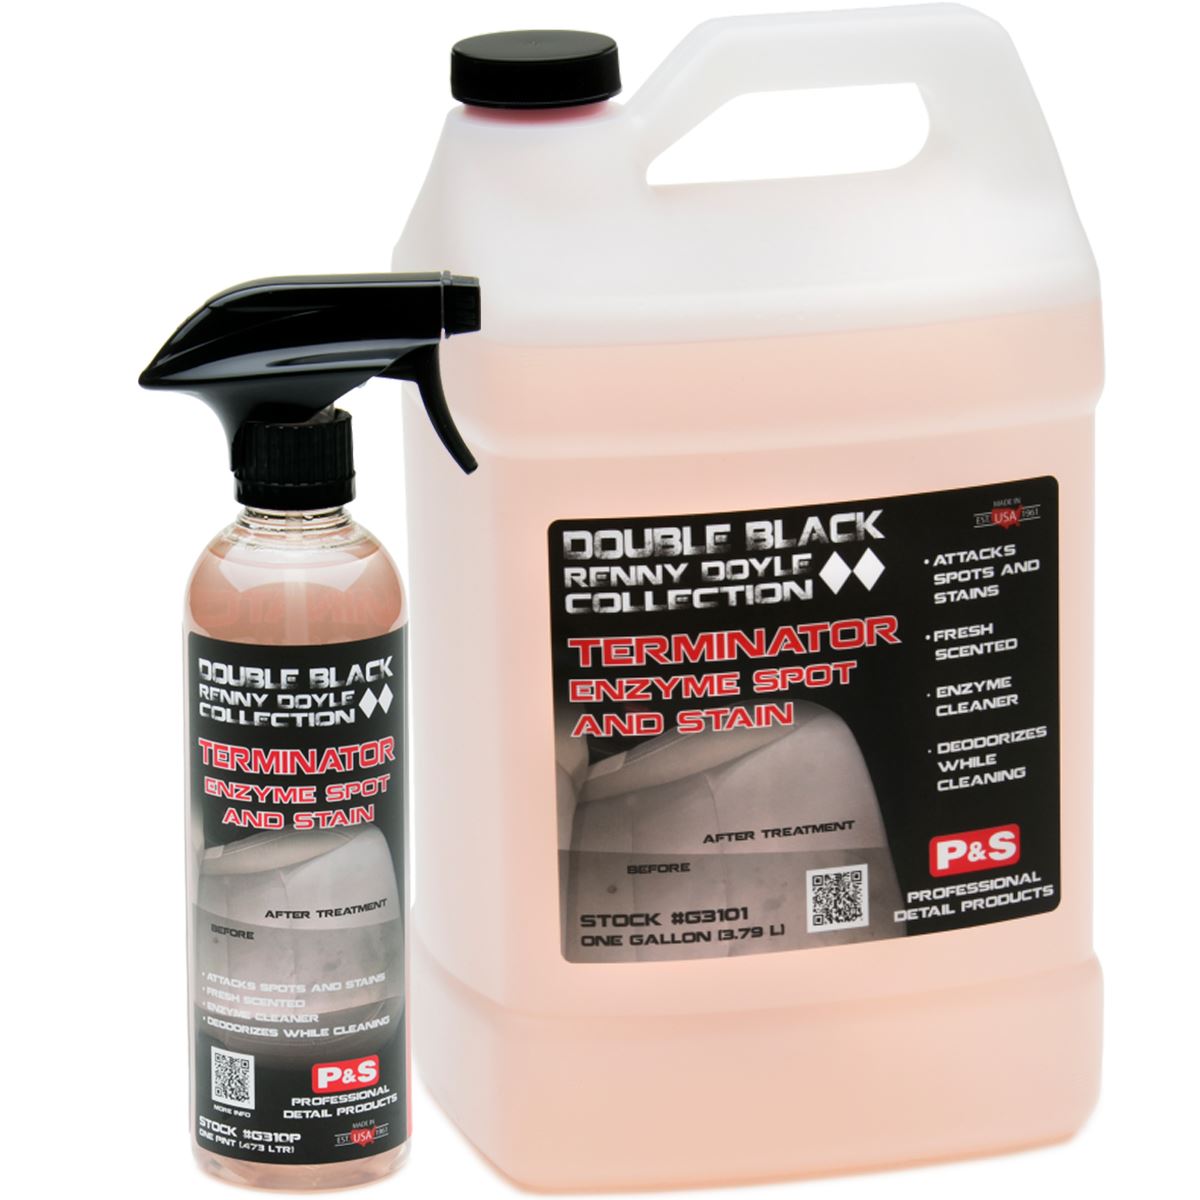 TERMINATOR ENZYME SPOT AND STAIN REMOVER